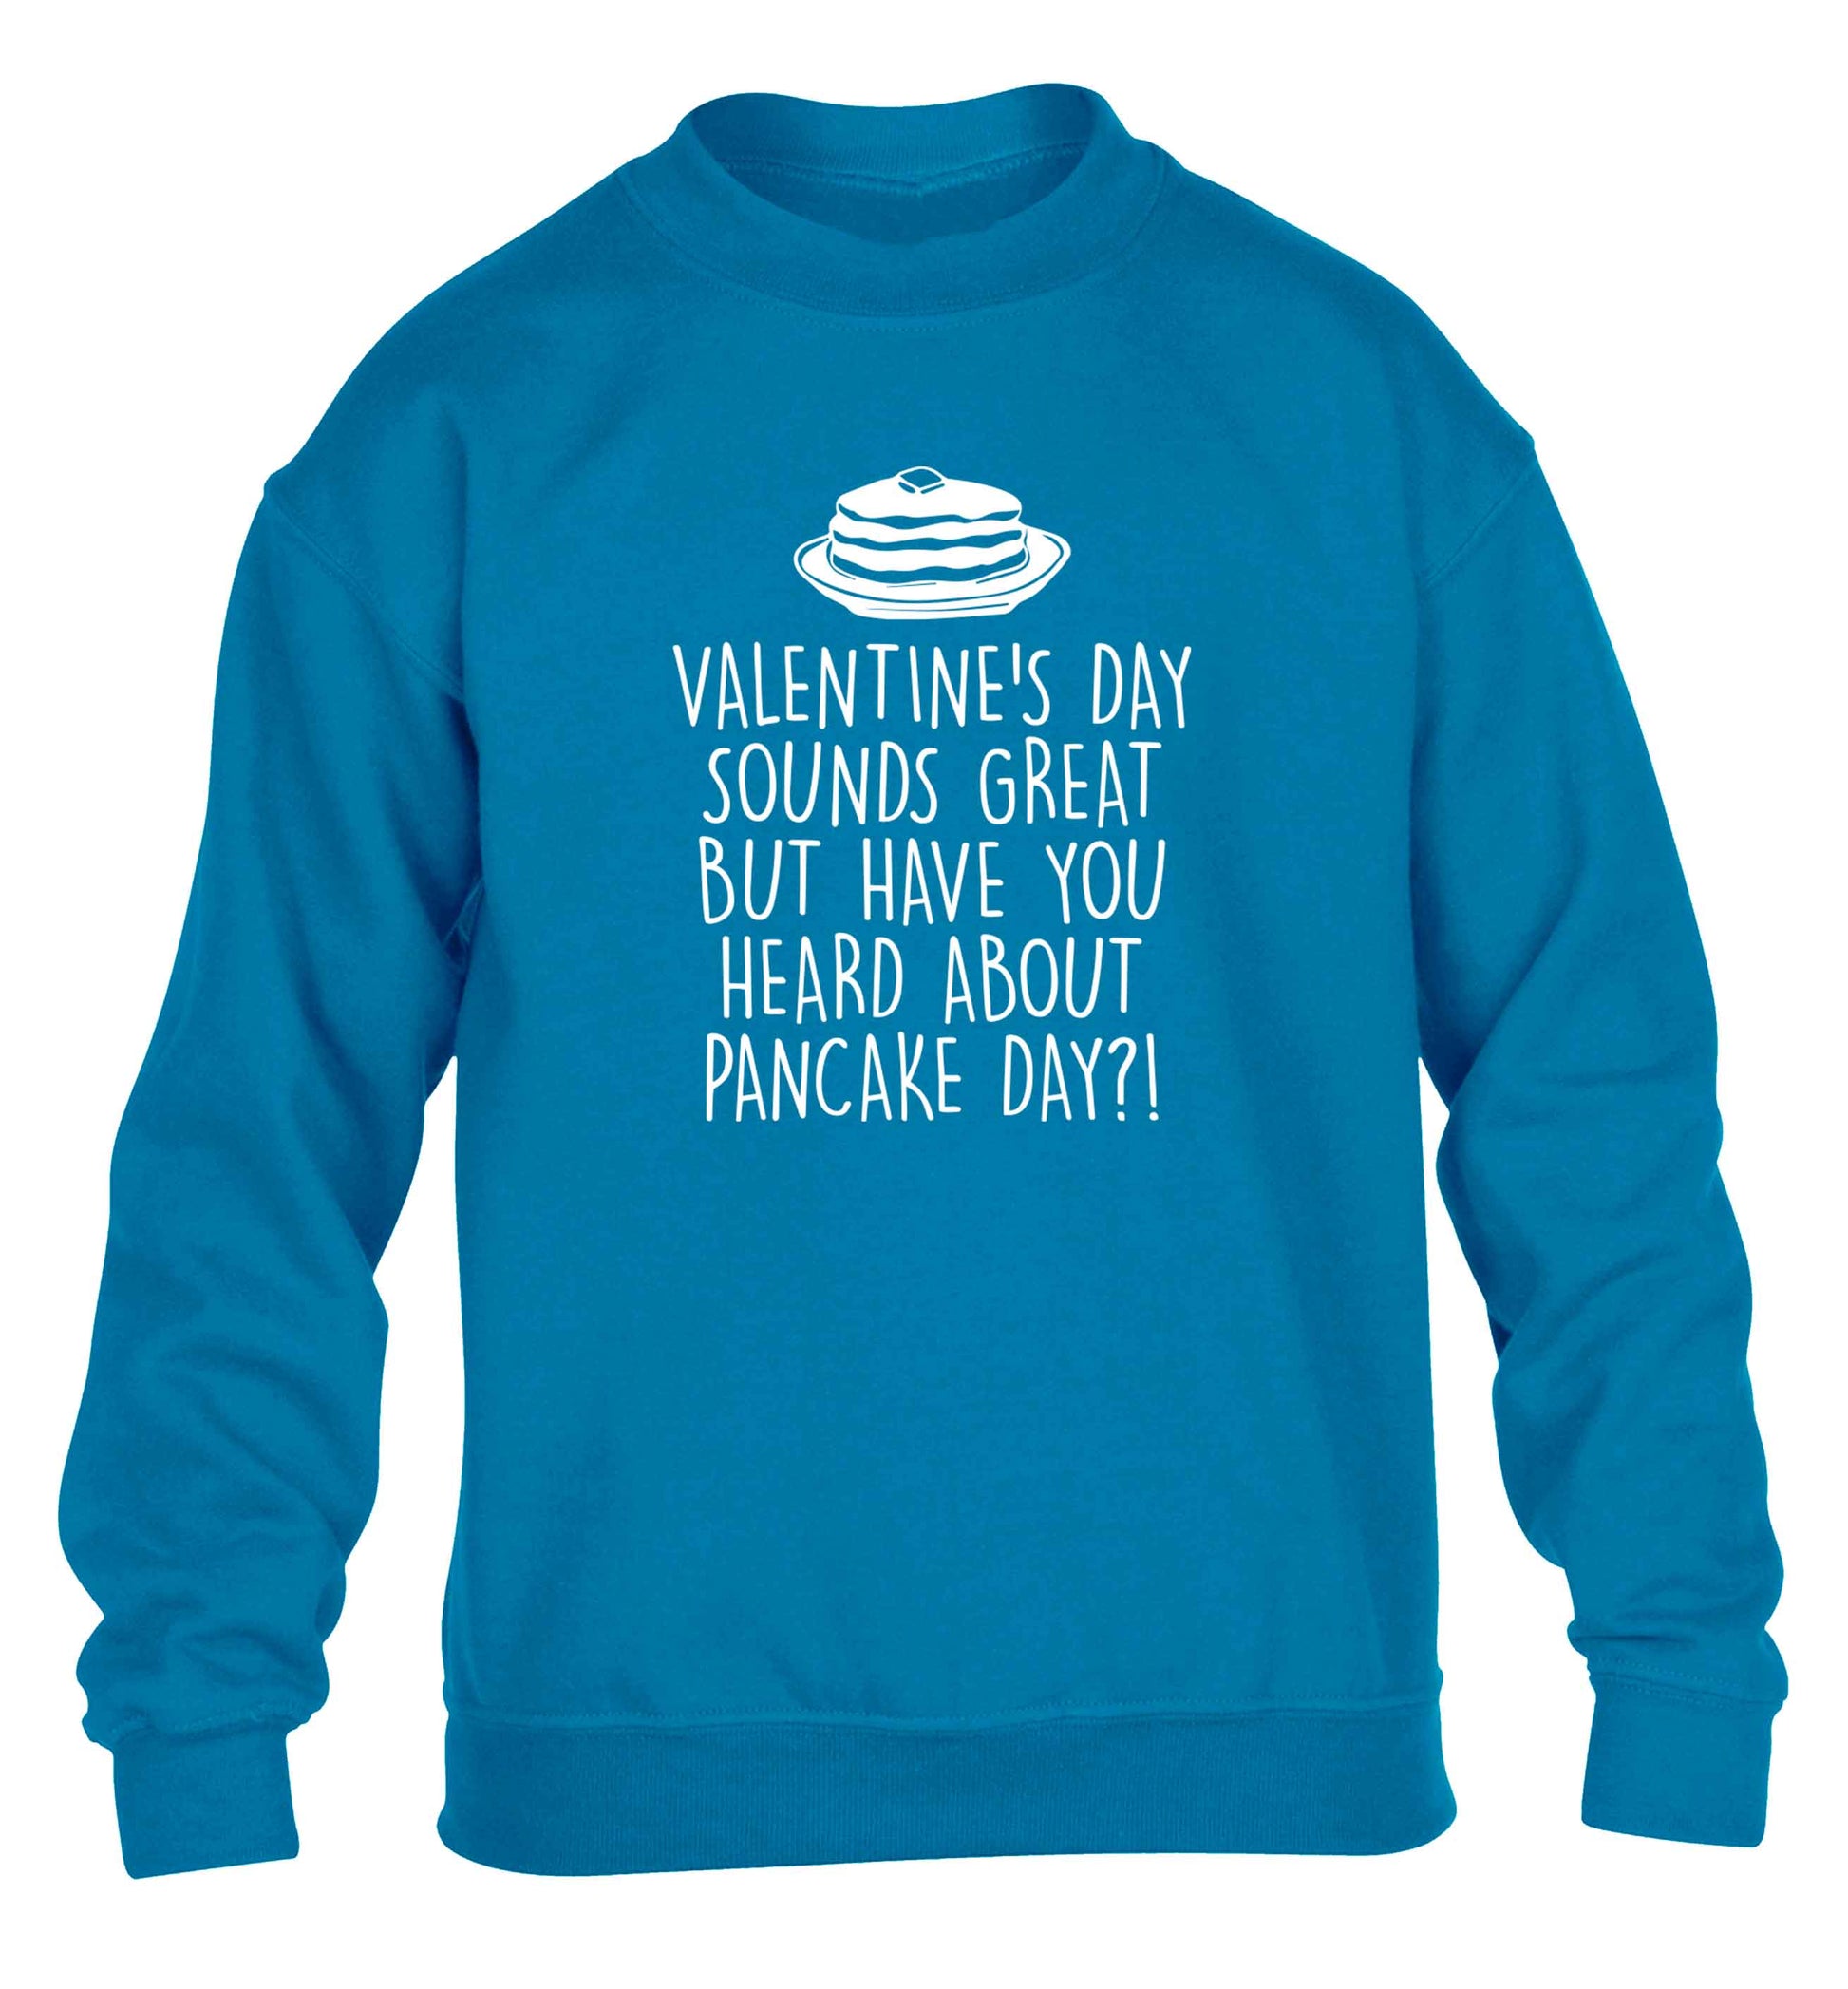 Valentine's day sounds great but have you heard about pancake day?! children's blue sweater 12-13 Years